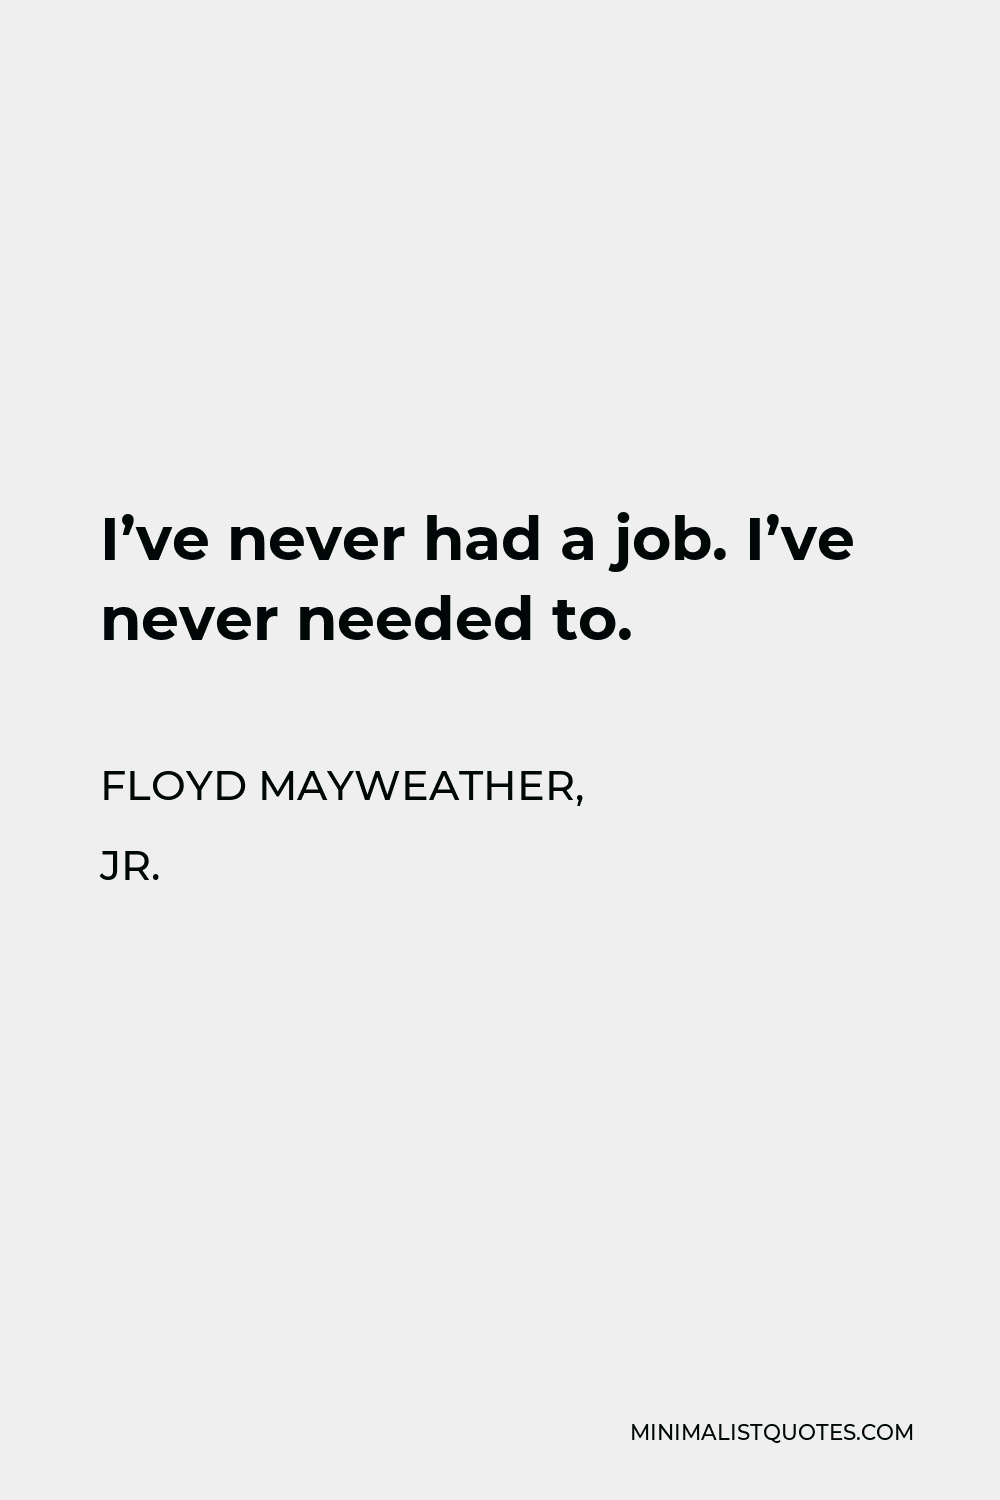 Floyd Mayweather, Jr. Quote - I’ve never had a job. I’ve never needed to.